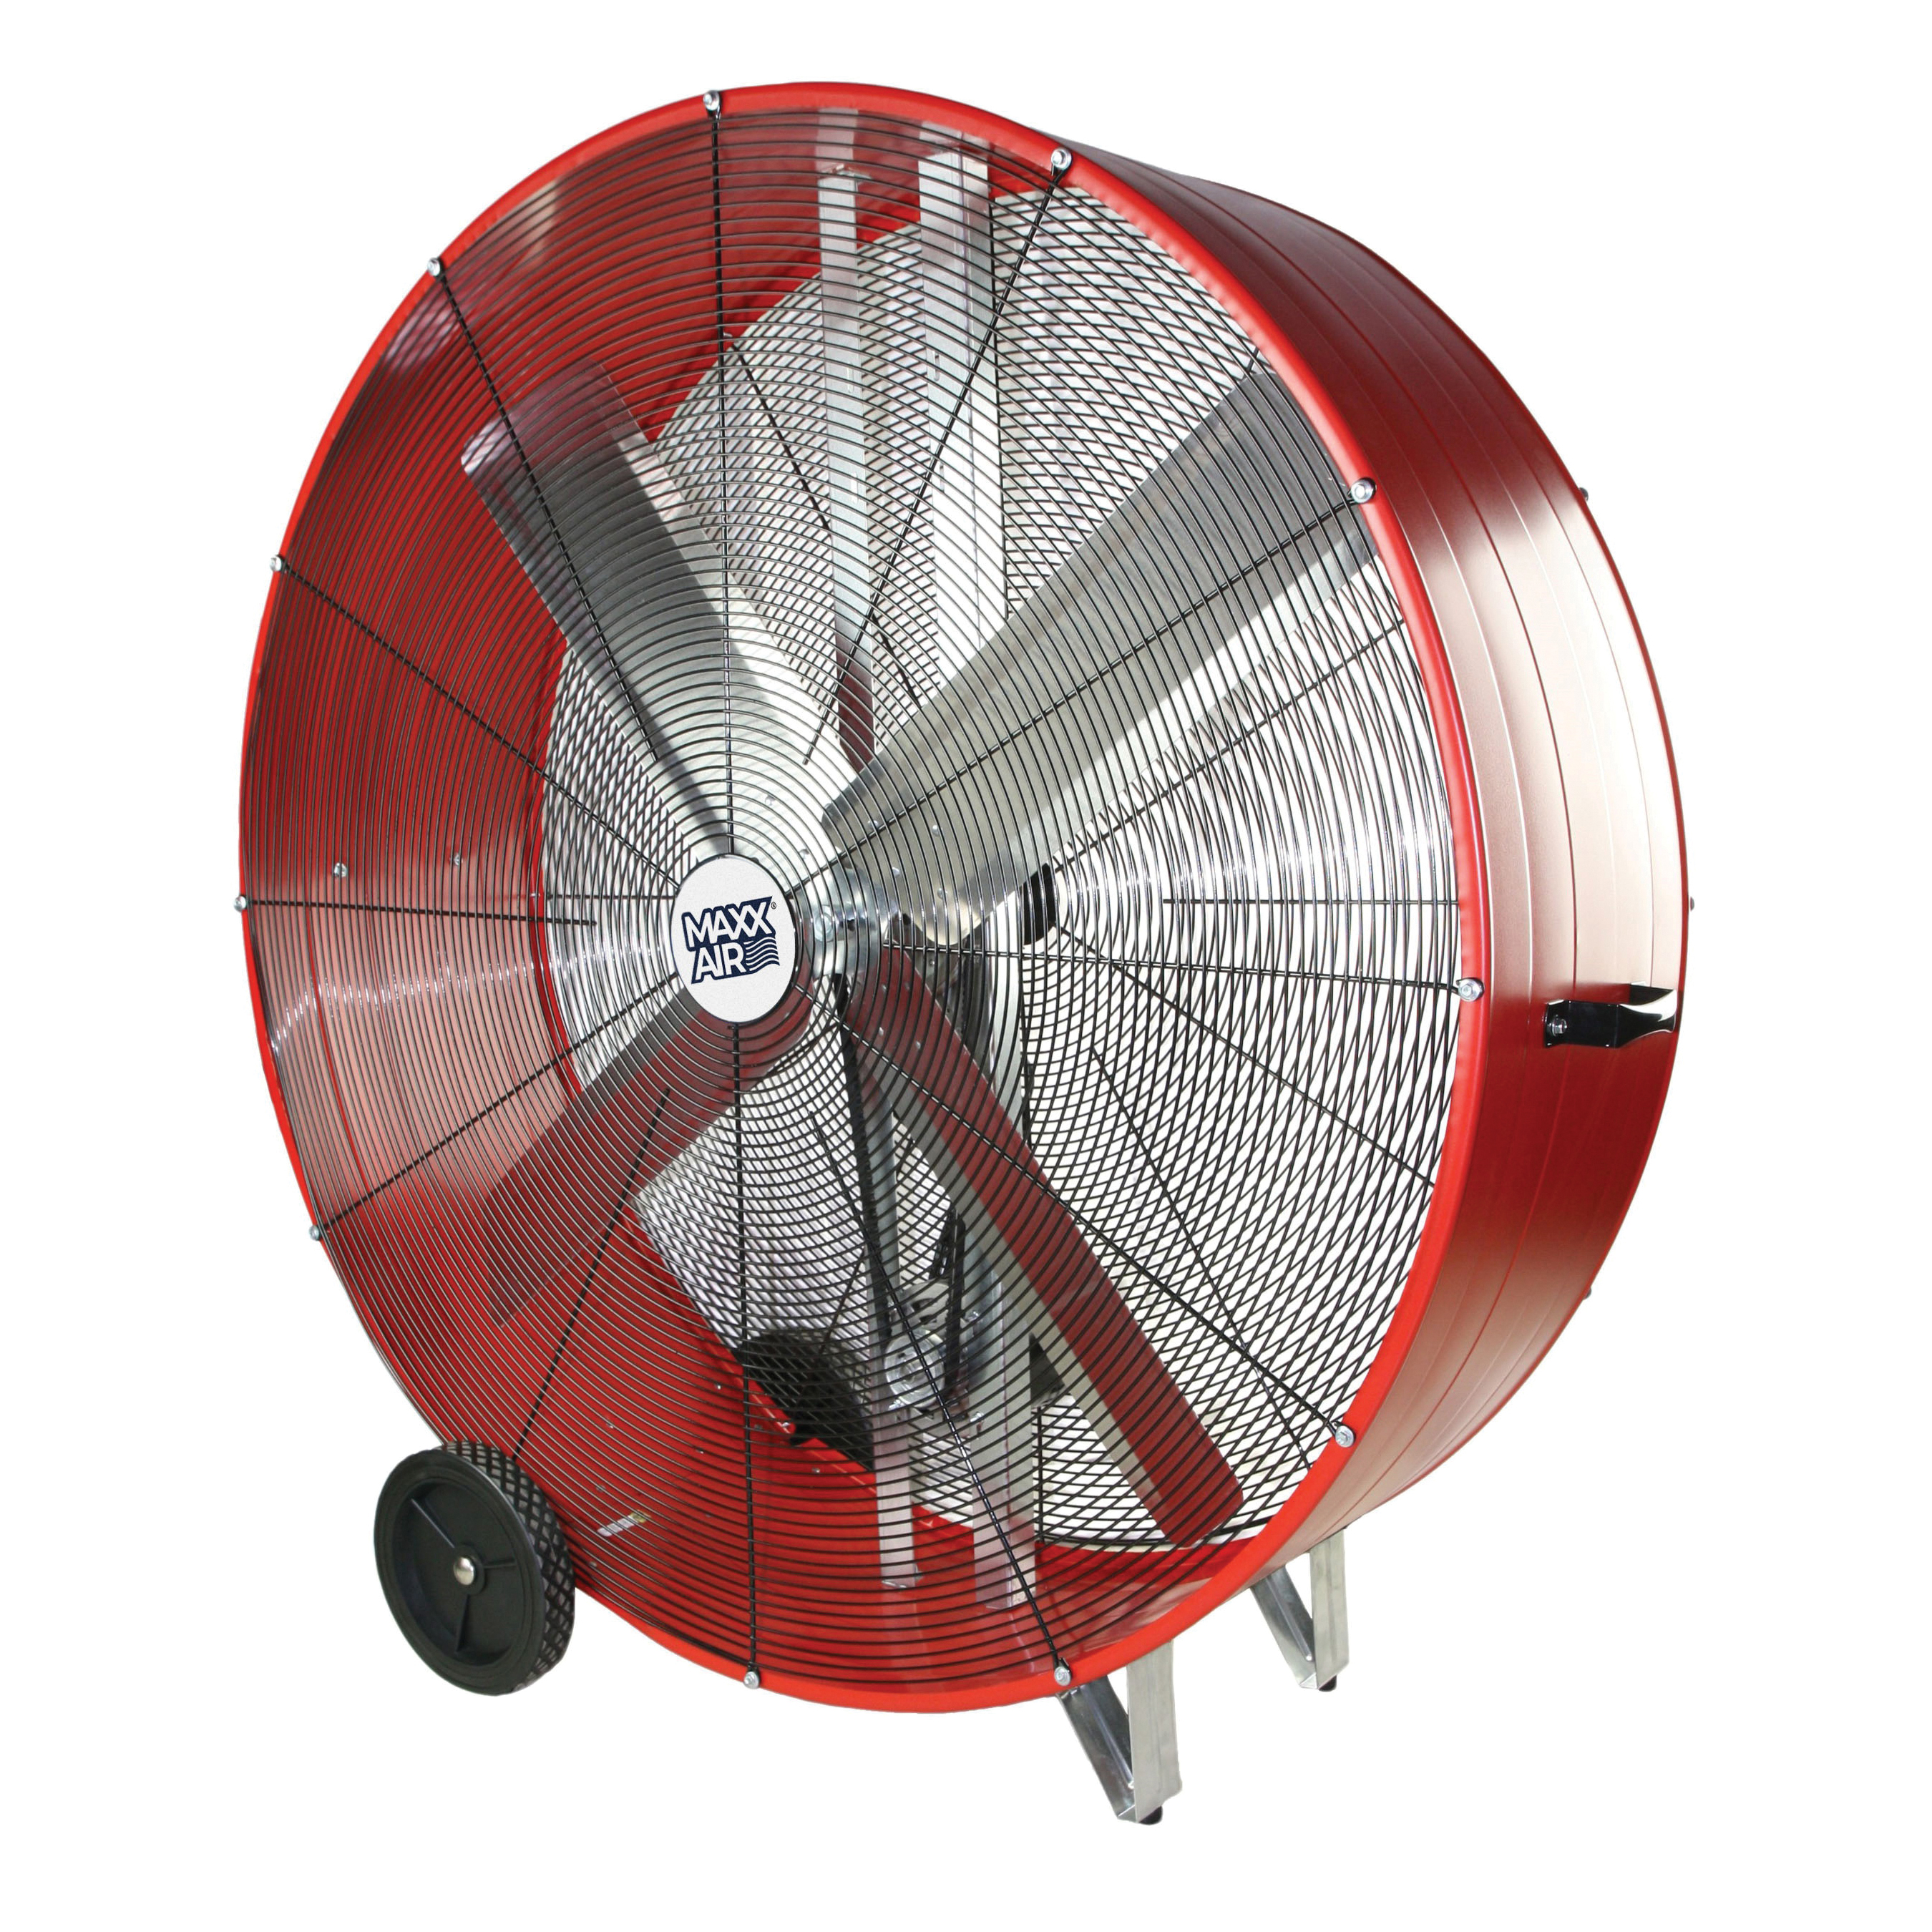 MaxxAir BF48BDRED Portable Drum Fan, 120 V, 2-Speed, 10,100 to 18,000 cfm Air, Black/Red - 2